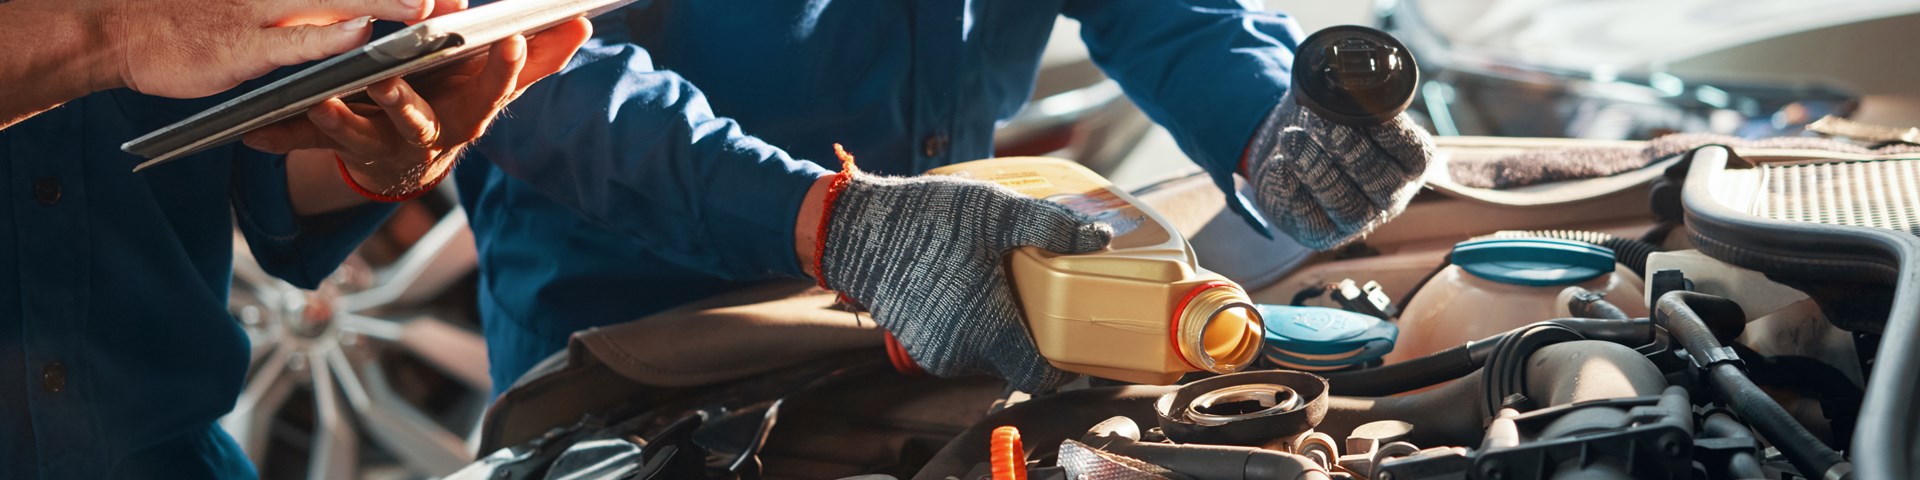 Mechanic Filling Car With Oil 